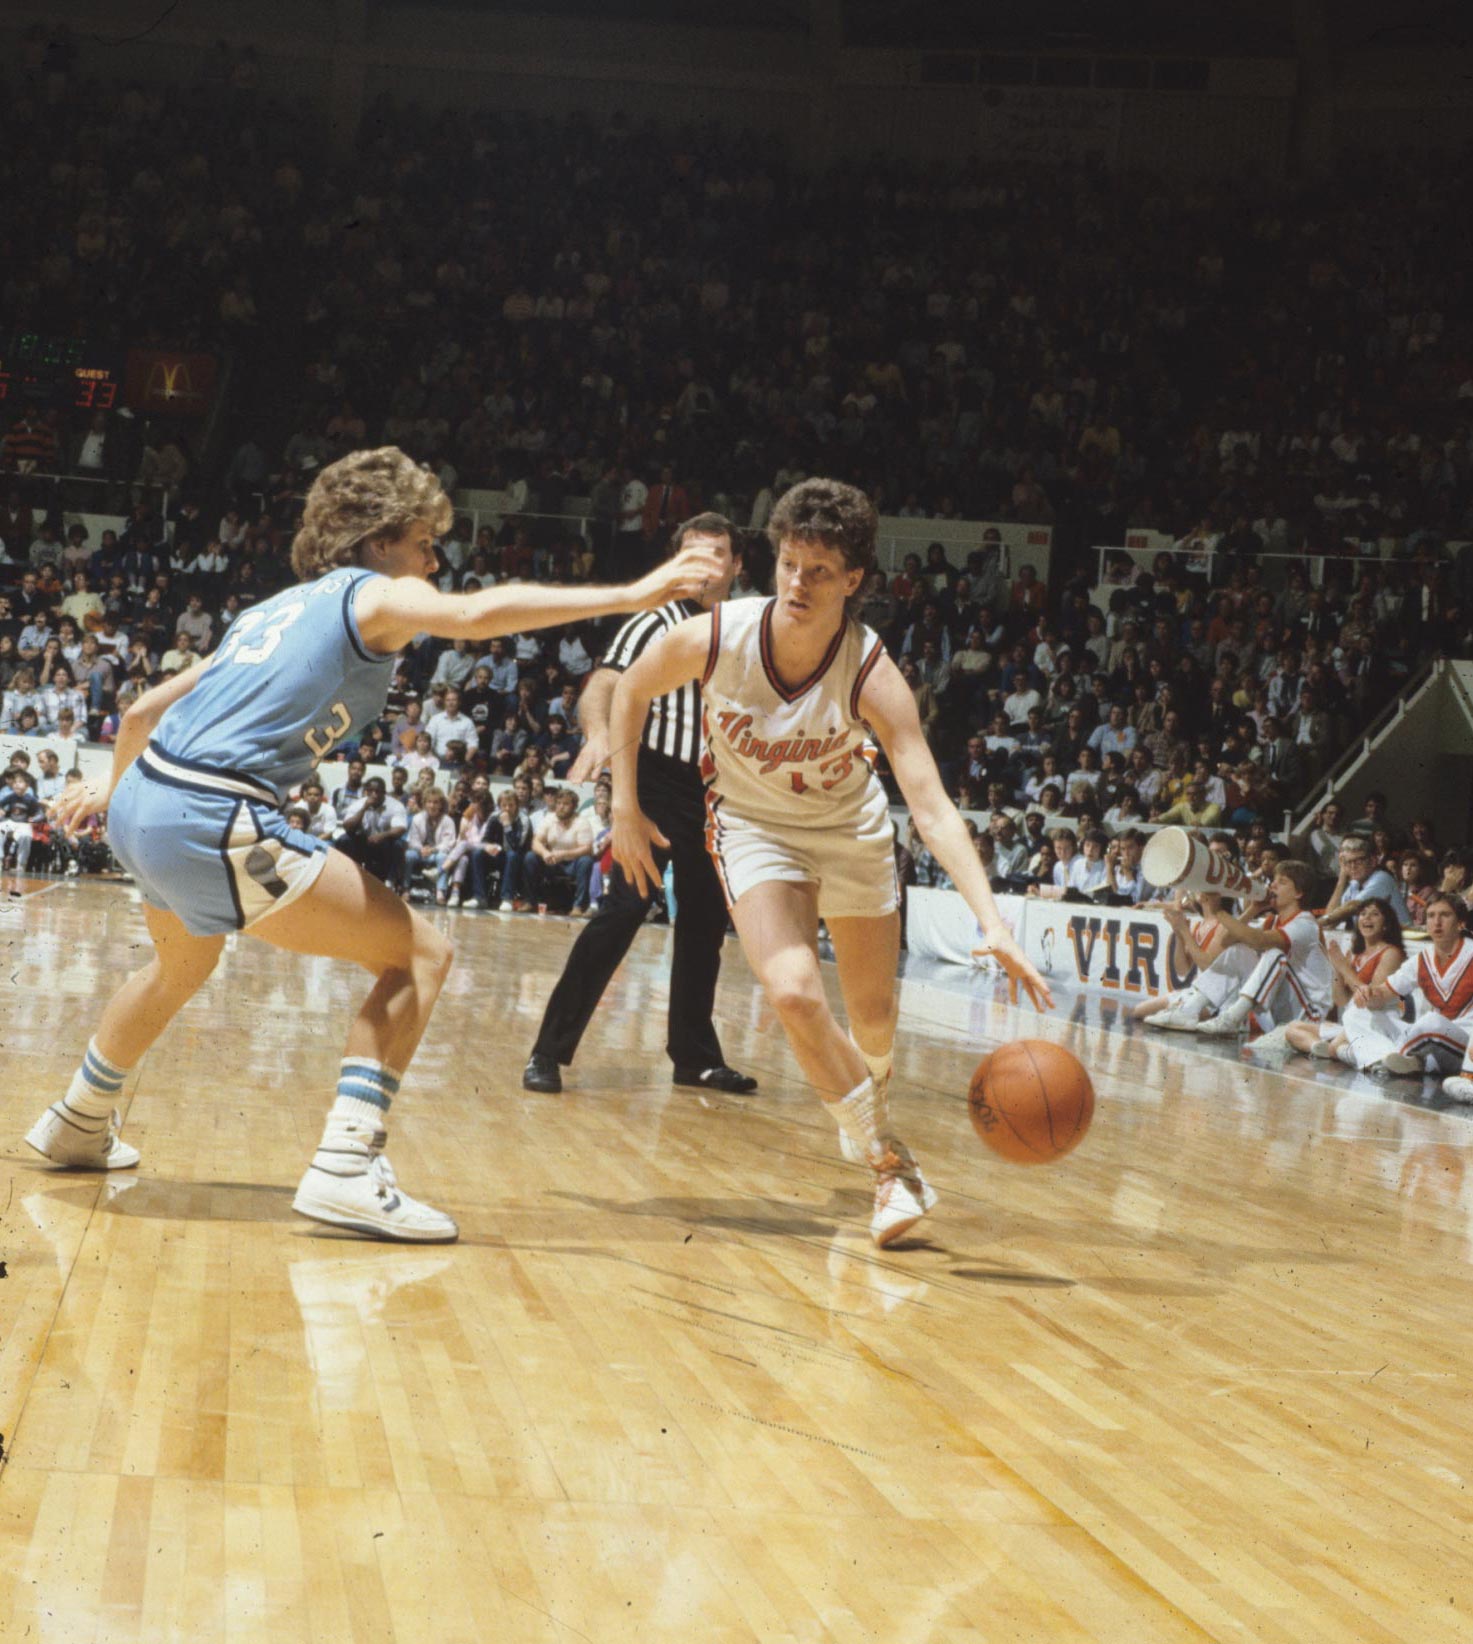 Old image of basketball player dribbling around an opponent